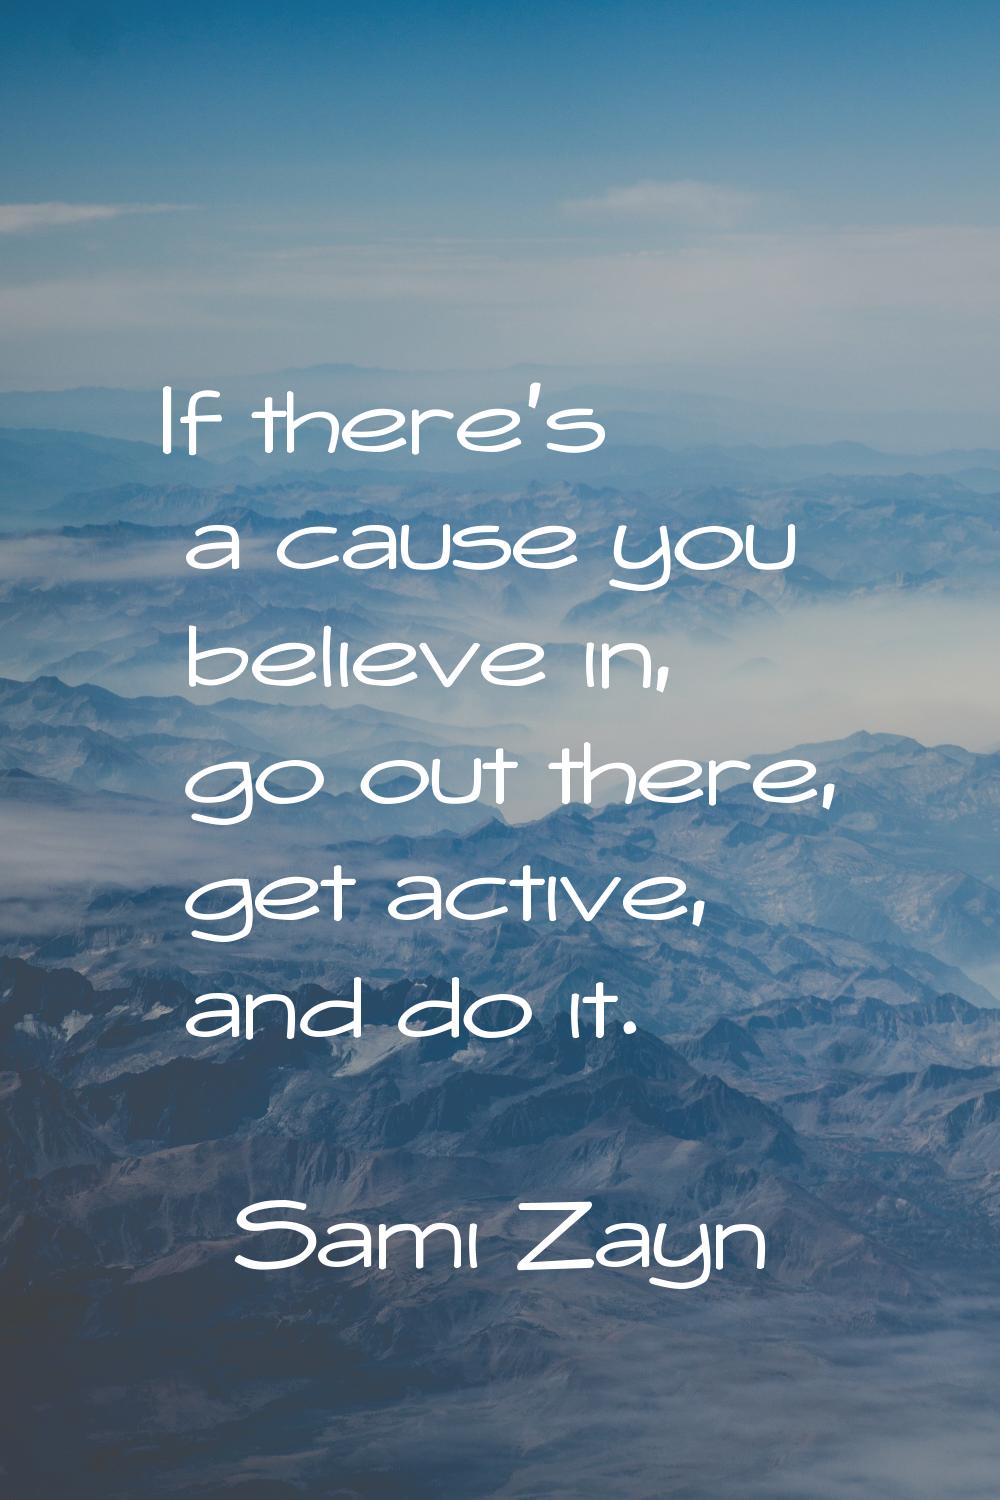 If there's a cause you believe in, go out there, get active, and do it.